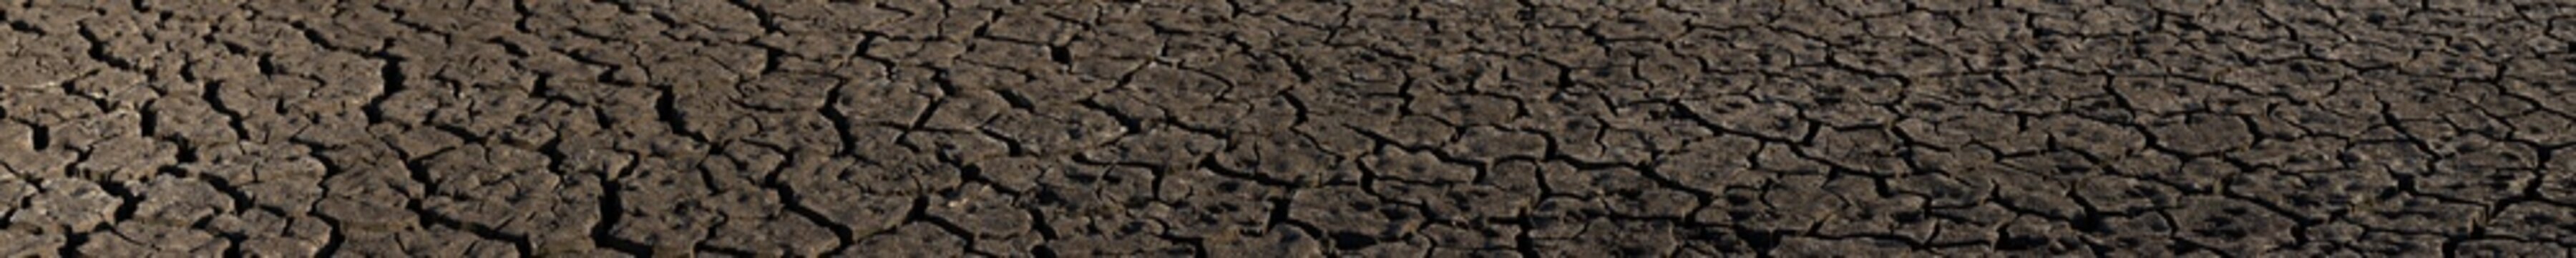 Earth cracked because of drought. The global shortage of water on the planet. Global warming concept. Dry cracks in the land.